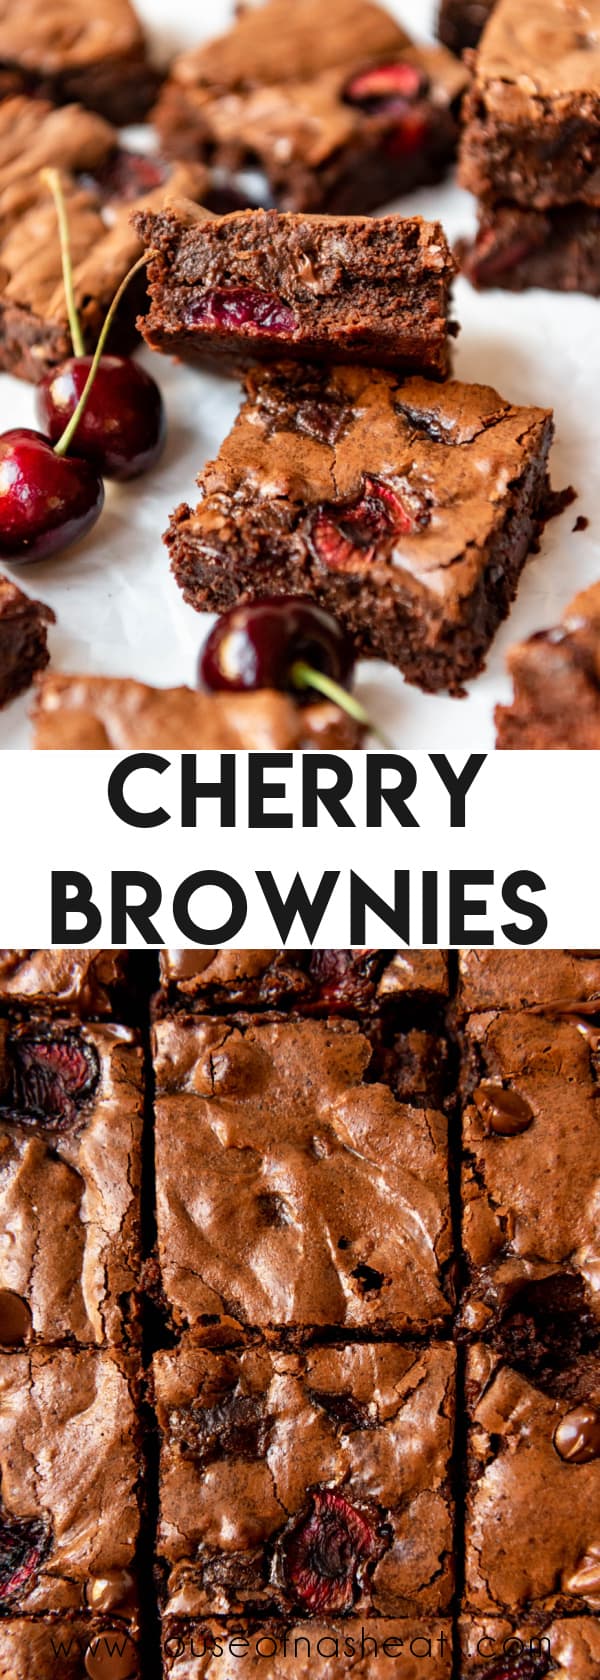 A collage of images of cherry brownies with text overlay.